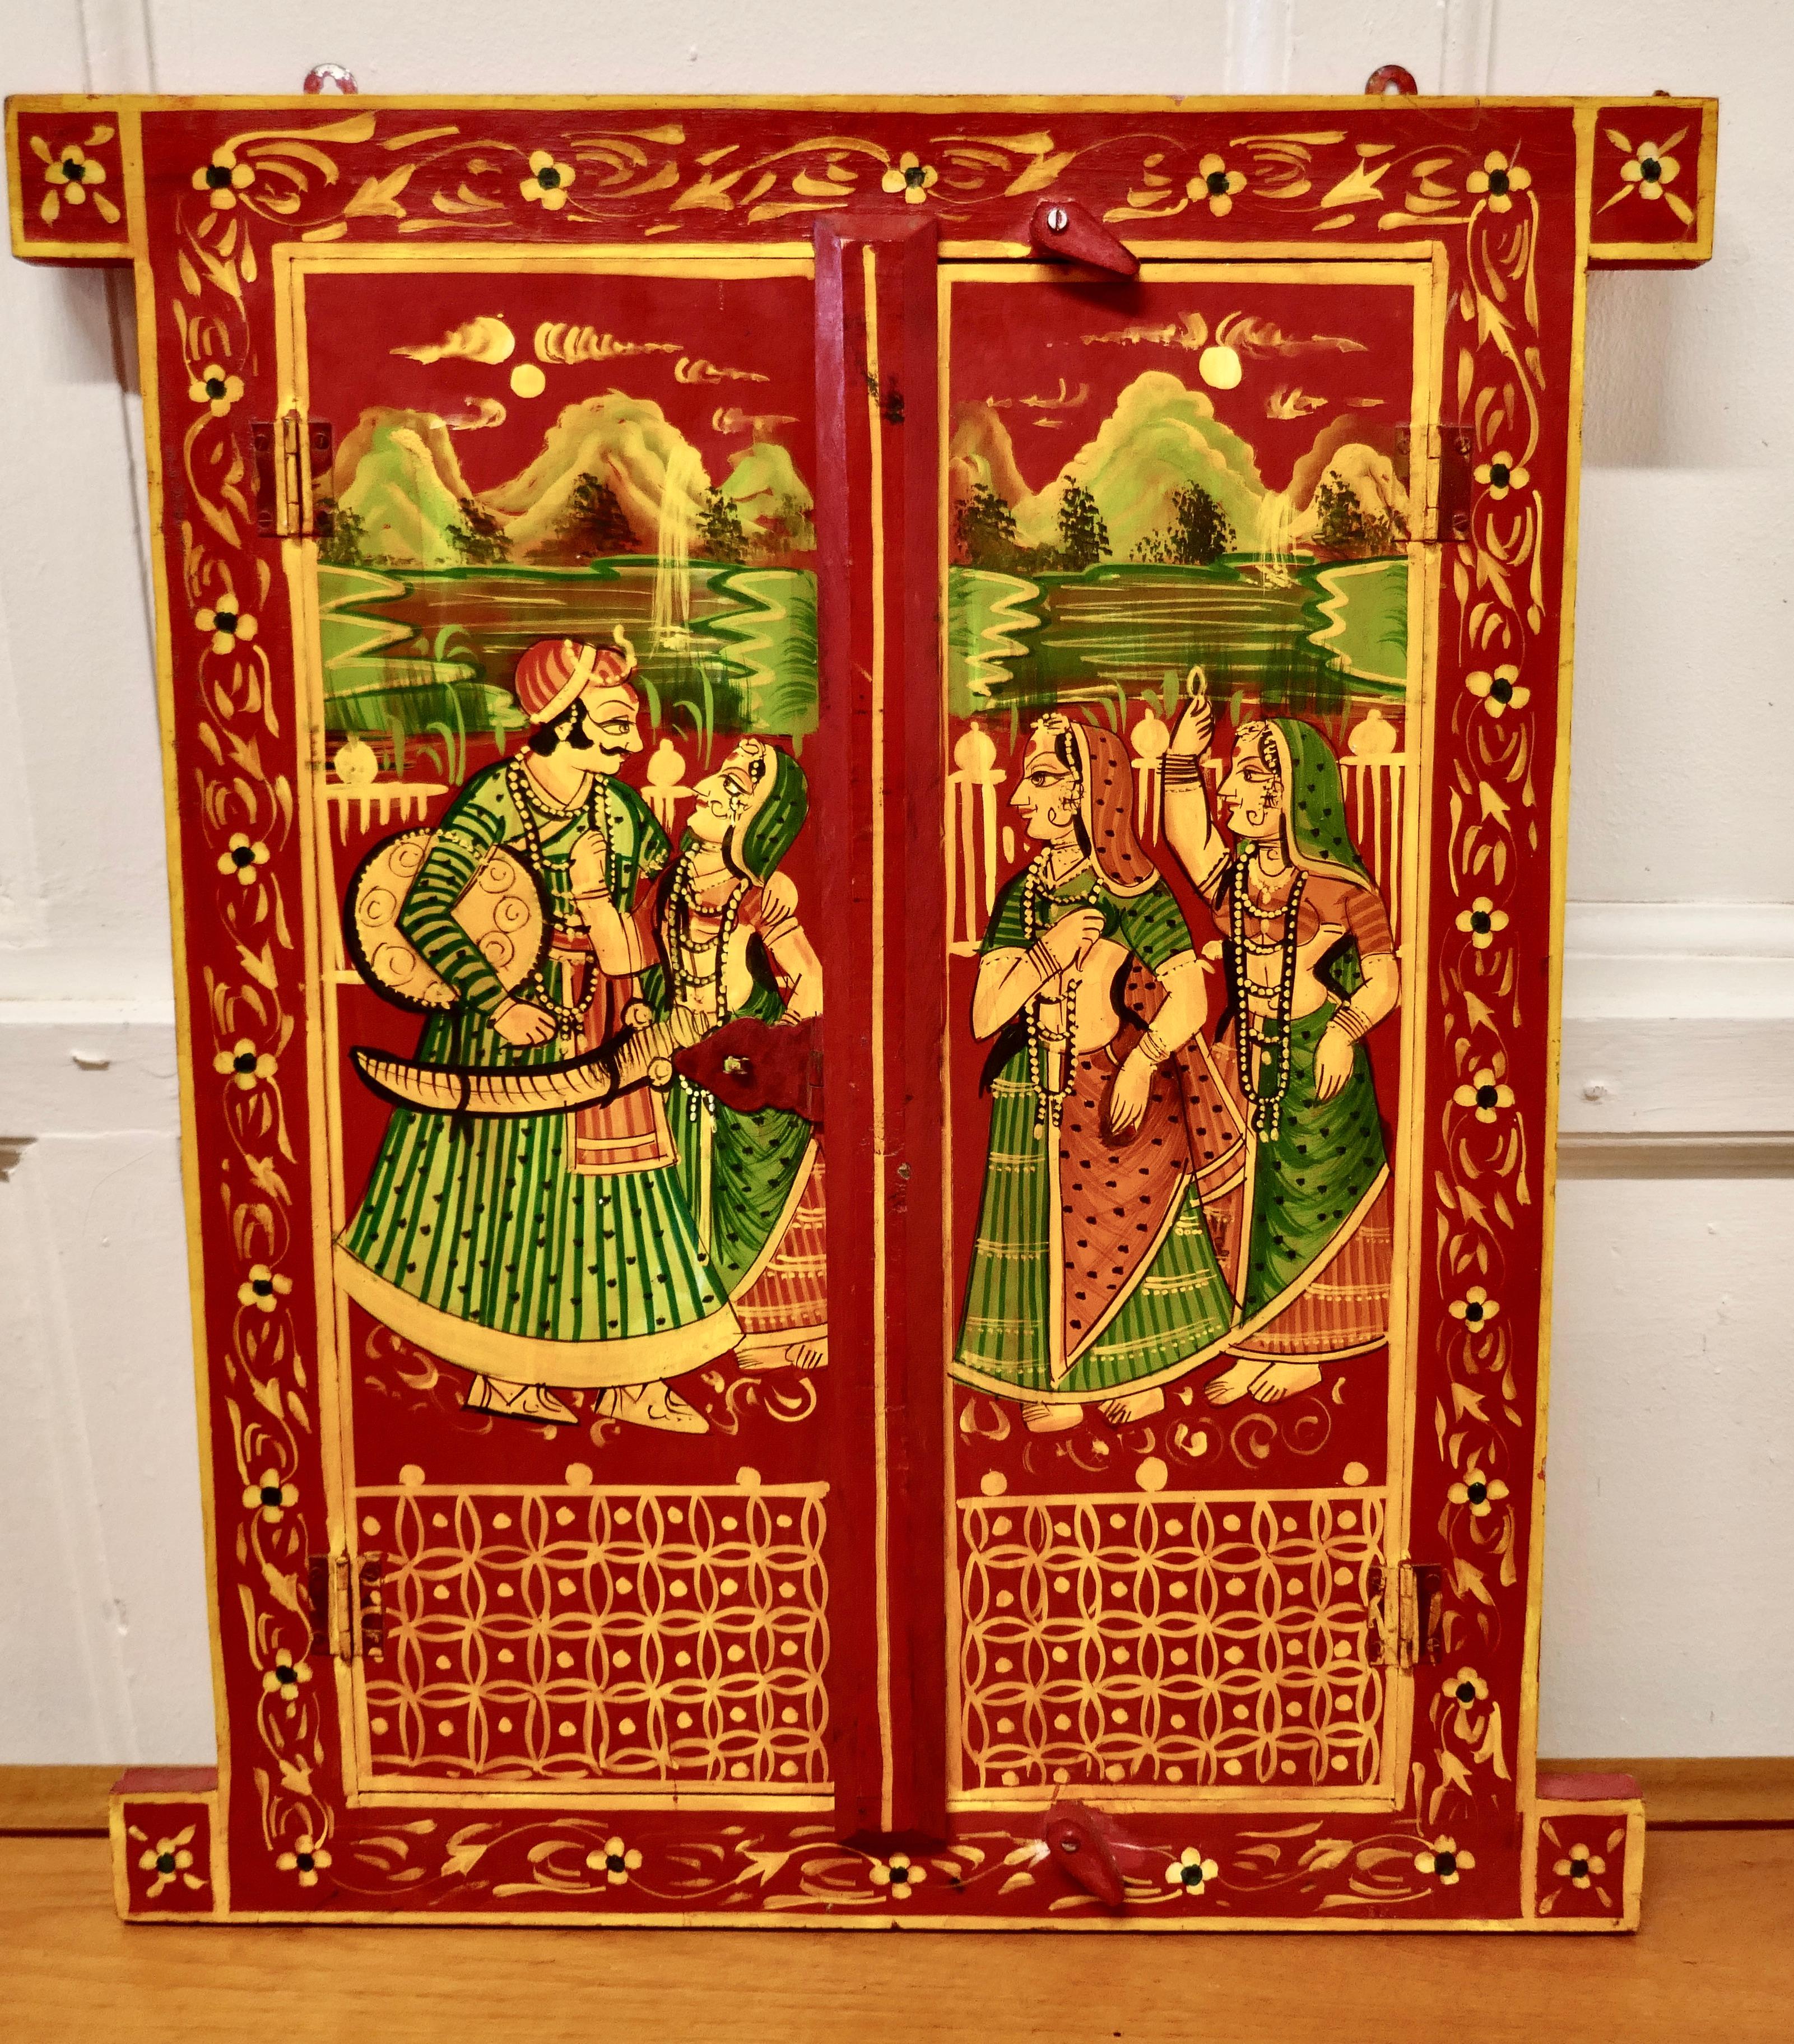 Indian miniature doors, Folk Art shutters

These Beautiful framed doors are beautifully and brightly hand painted with Indian Characters in traditional dress.
The pair of doors have their original metal hinges and wooden closers. This is a most